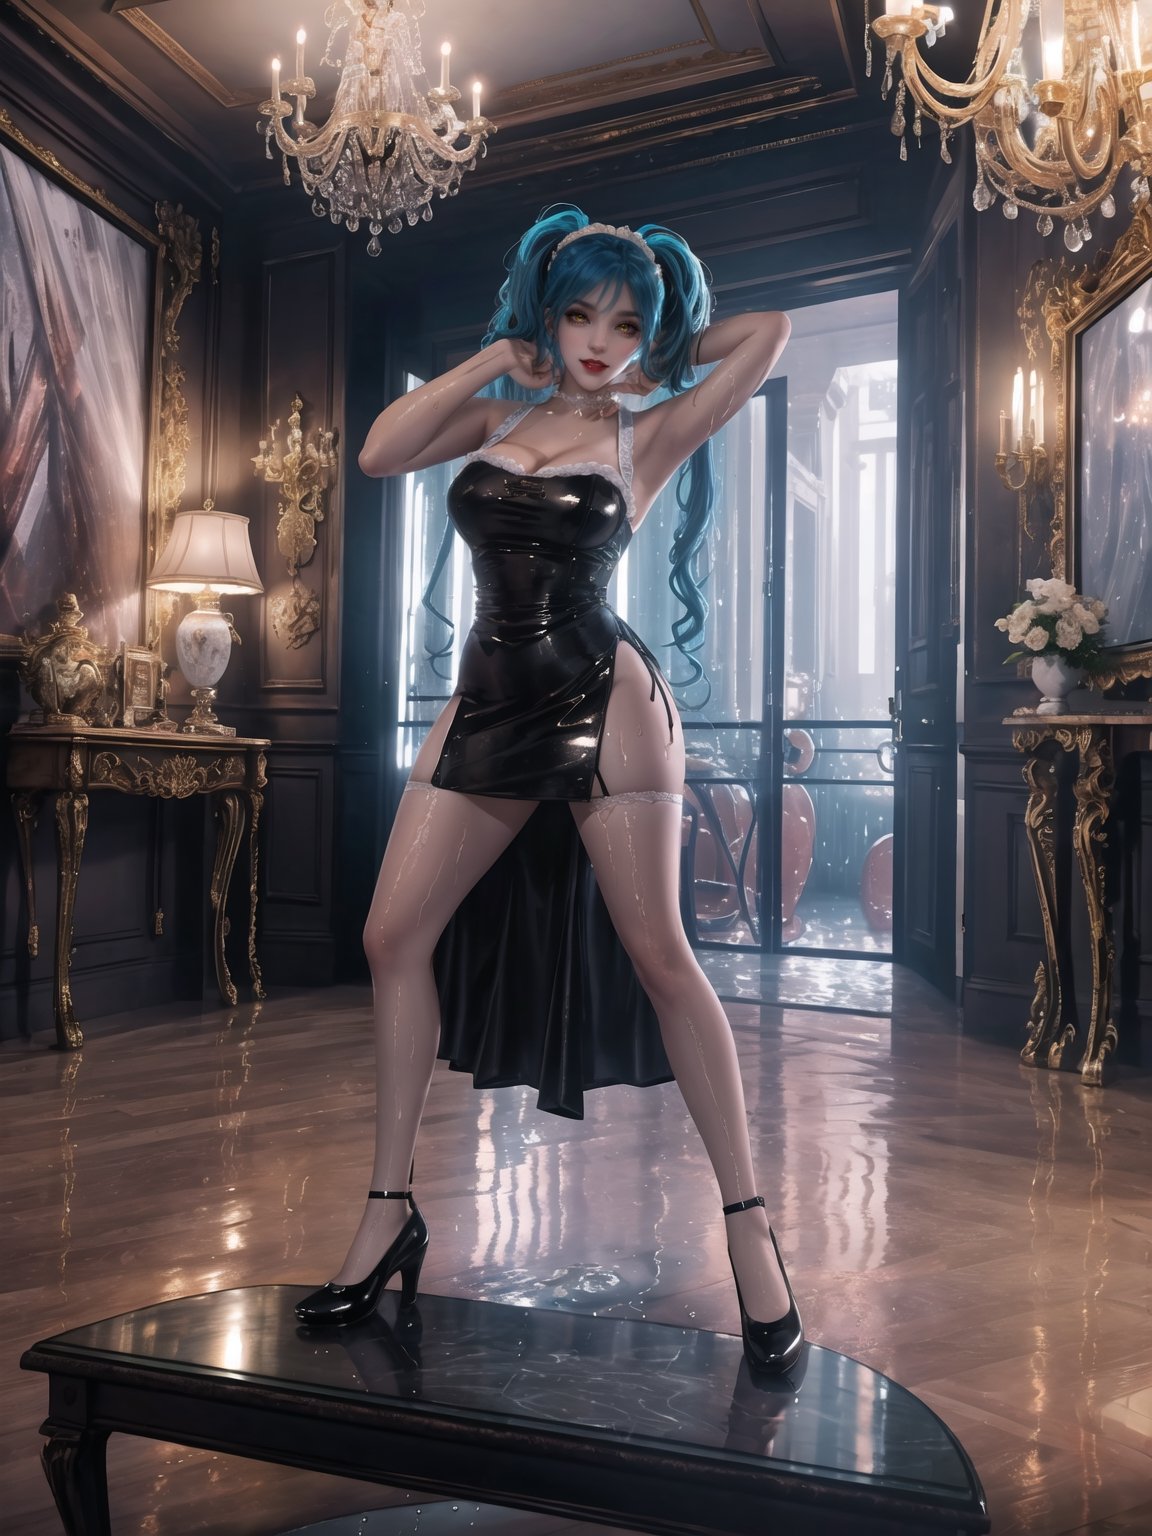 High resolution in 4K, inspired by urban surrealism with touches of classic elegance. | The housekeeper, a beautiful 30-year-old woman, works boldly and sensually. Dressed in a black maid outfit with a white apron, lycra stockings, and black flat shoes, she stares directly at the viewer with her long, blue hair tied in two pigtails with metallic clips, adding a playful touch to her appearance. Her entire body and clothing are wet from water, giving a bold look to the scene. | The setting is in a large and luxurious apartment, filled with elegant furniture and marble structures. A glass dining table, a bookshelf with a 90-inch television, and a window overlooking the rainy city at night make up the scene. The housekeeper, with a bold attitude, interacts with imposing structures, leaning on them and adopting sensual poses, creating a provocative and unique dynamic. | A 30-year-old housekeeper with a blend of urban surrealism and classic elegance, working boldly and sensually in a luxurious apartment during a rainy night. | She: ((iinteracting with audacity, leaning on imposing structures, adopting sensual poses):1.3), (((Full body image))), perfect hand, fingers, hand, perfect, better_hands, More Detail,Fantexi